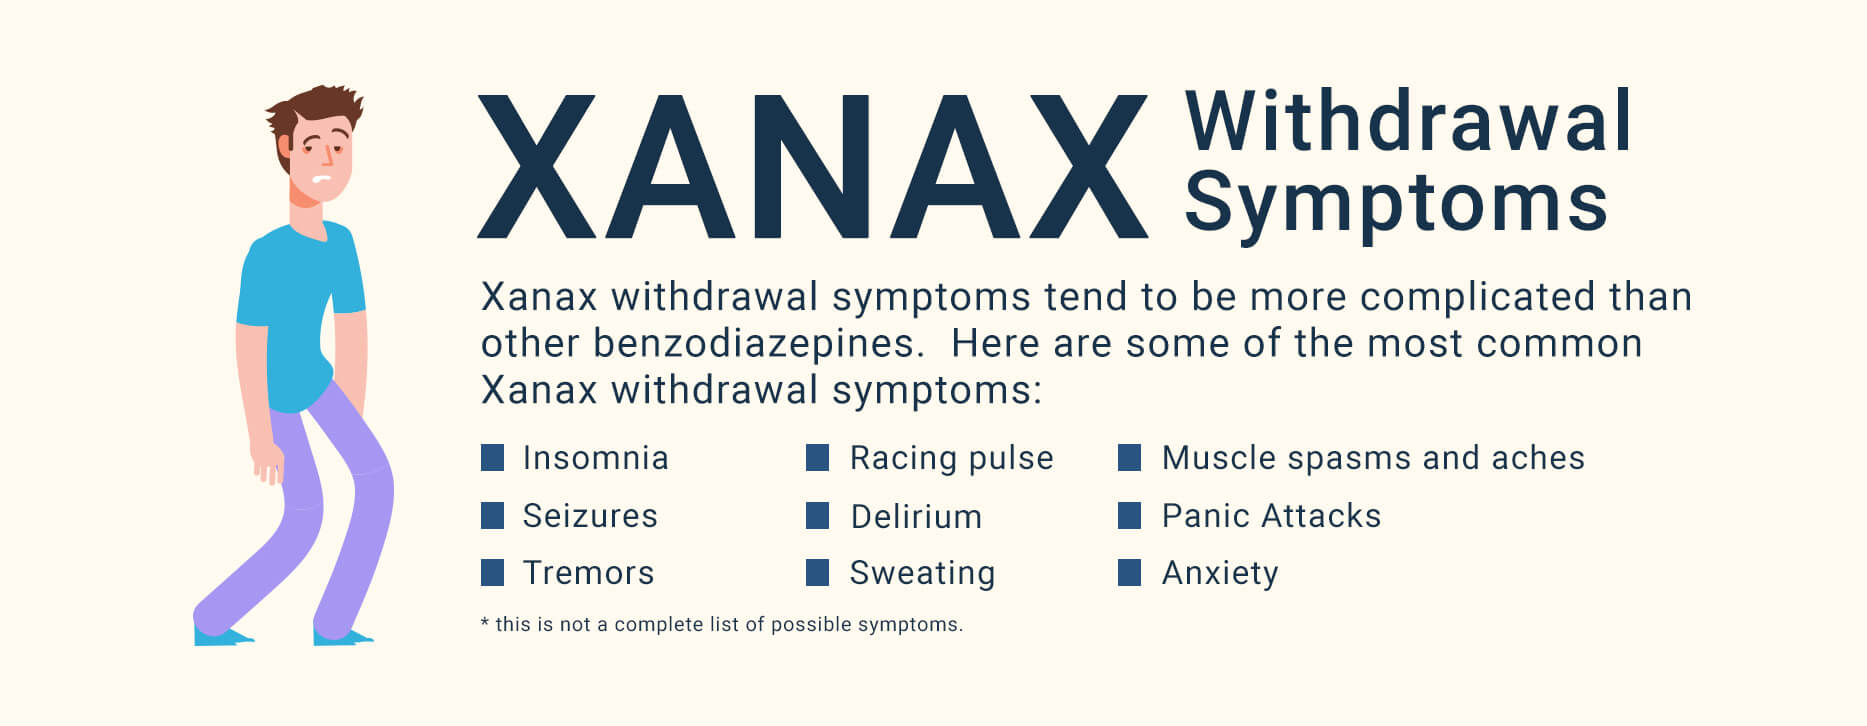 Stonegate Center Blog - Xanax Withdrawal Timeline, Symptoms, & Risks - Xanax Withdrawal Symptoms